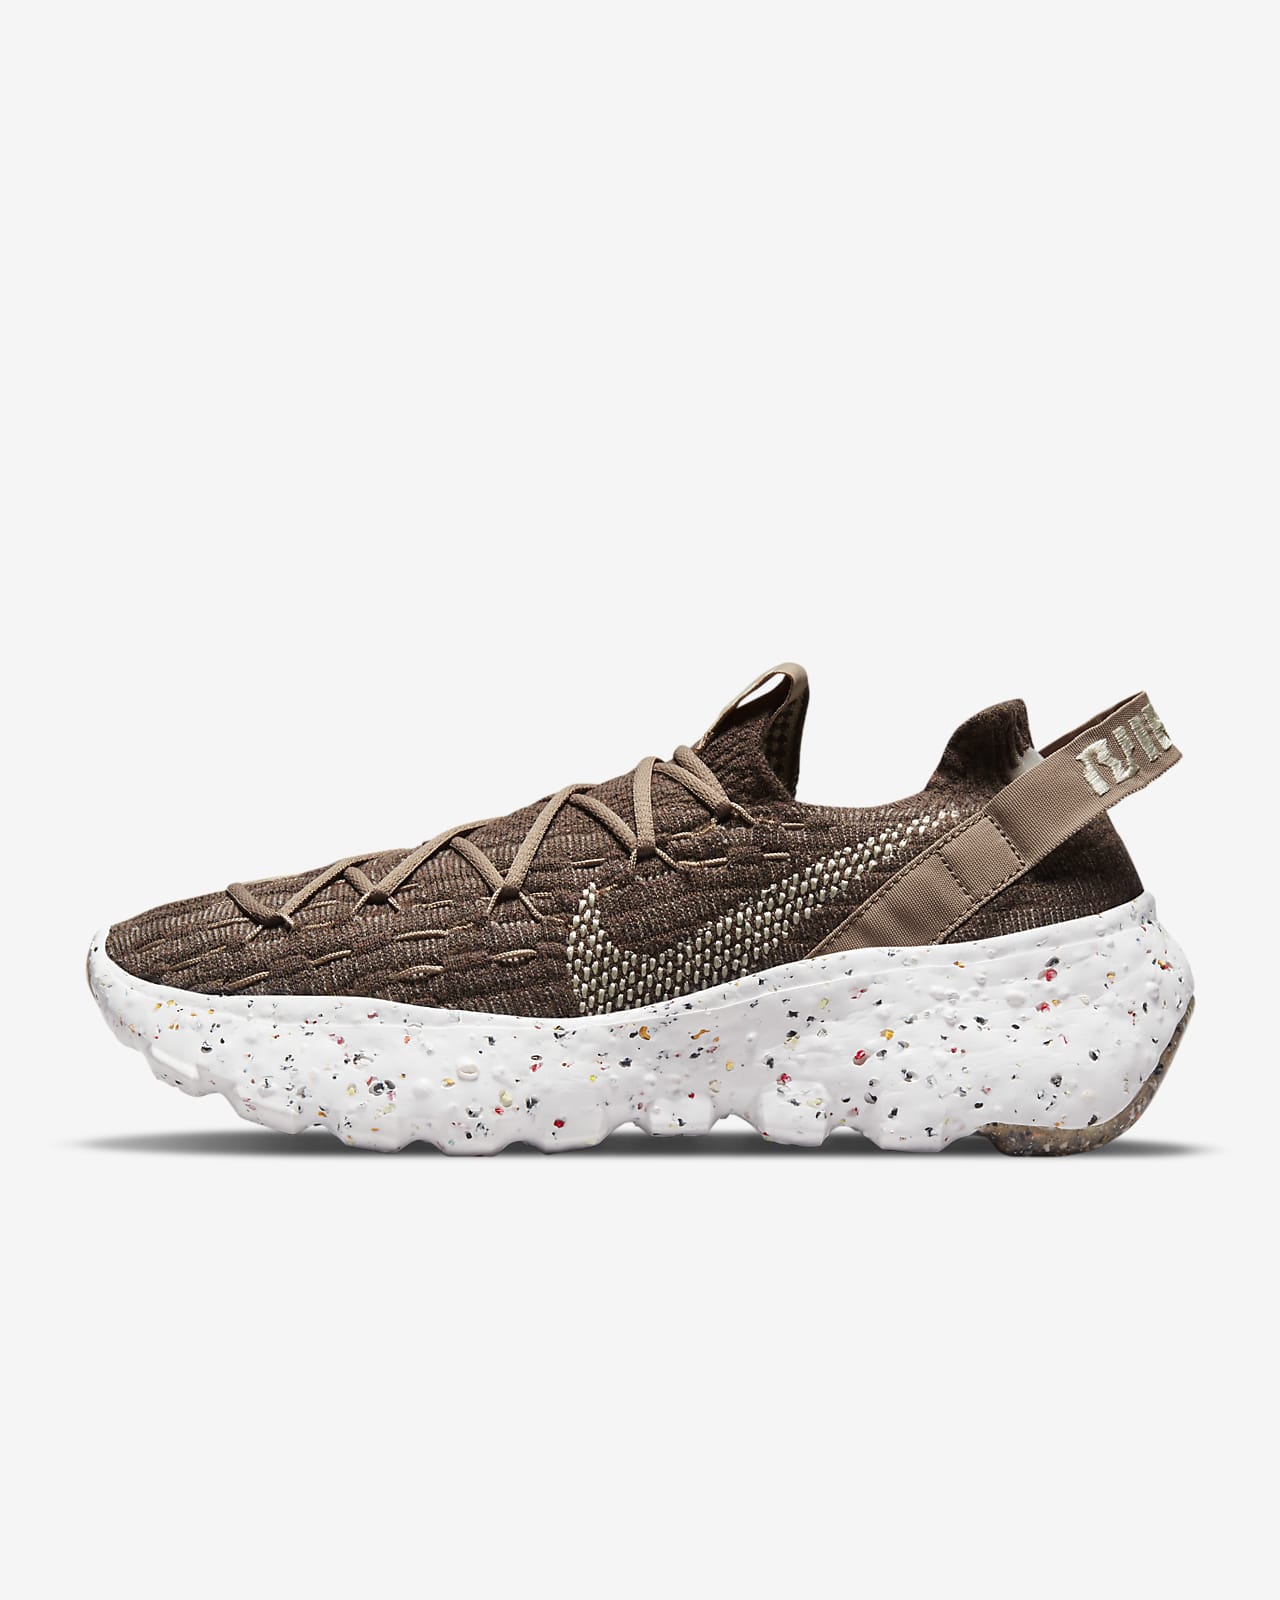 Chaussure Nike Space Hippie 04 pour Femme